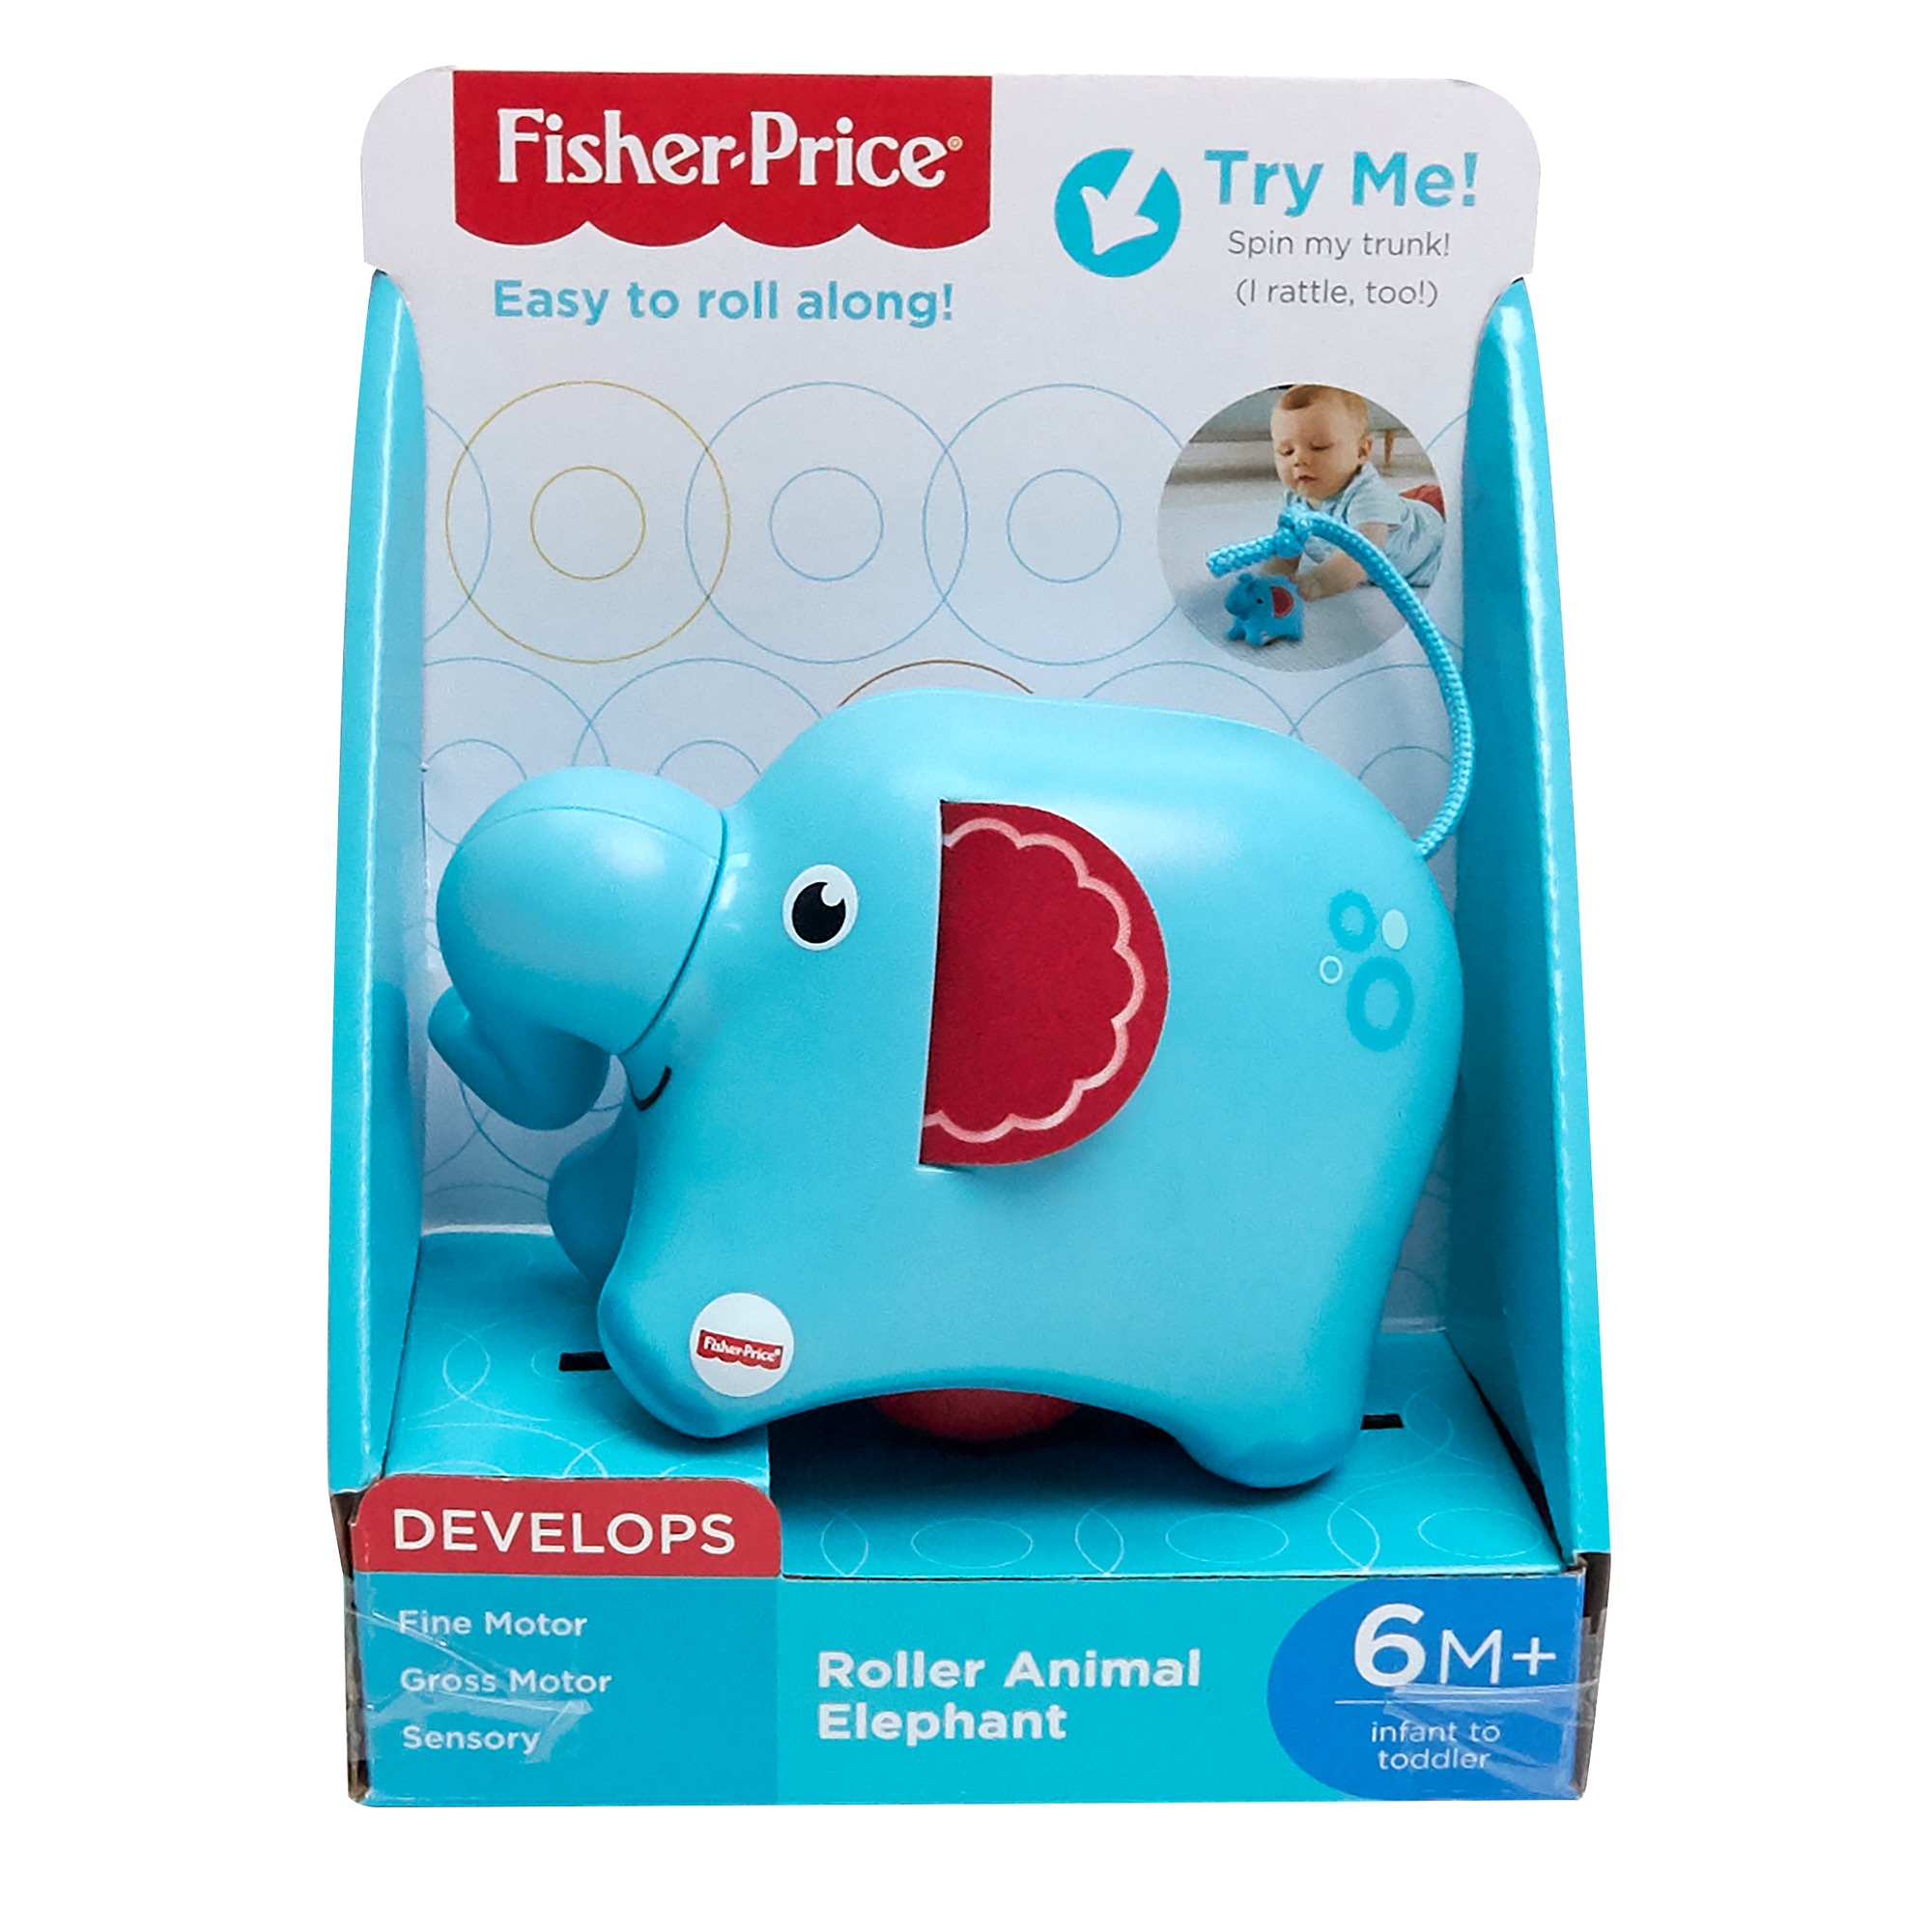 Fisher-Price Roller Elephant with Sounds & Sensory Play - image 4 of 4